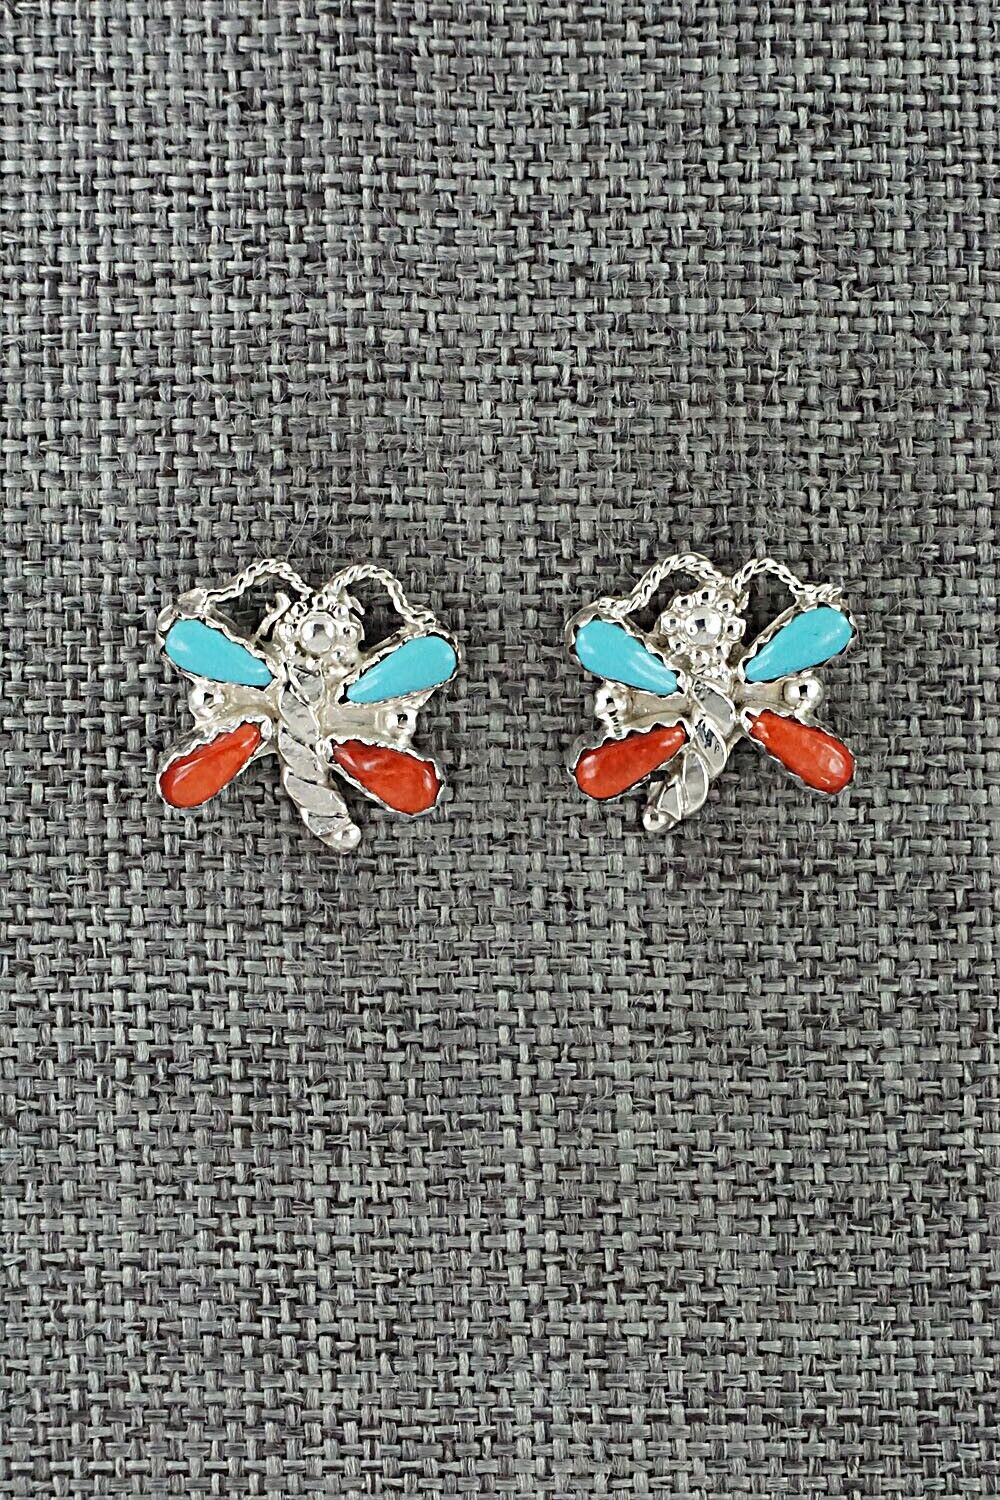 Turquoise, Coral & Sterling Silver Earrings - Erva Quam